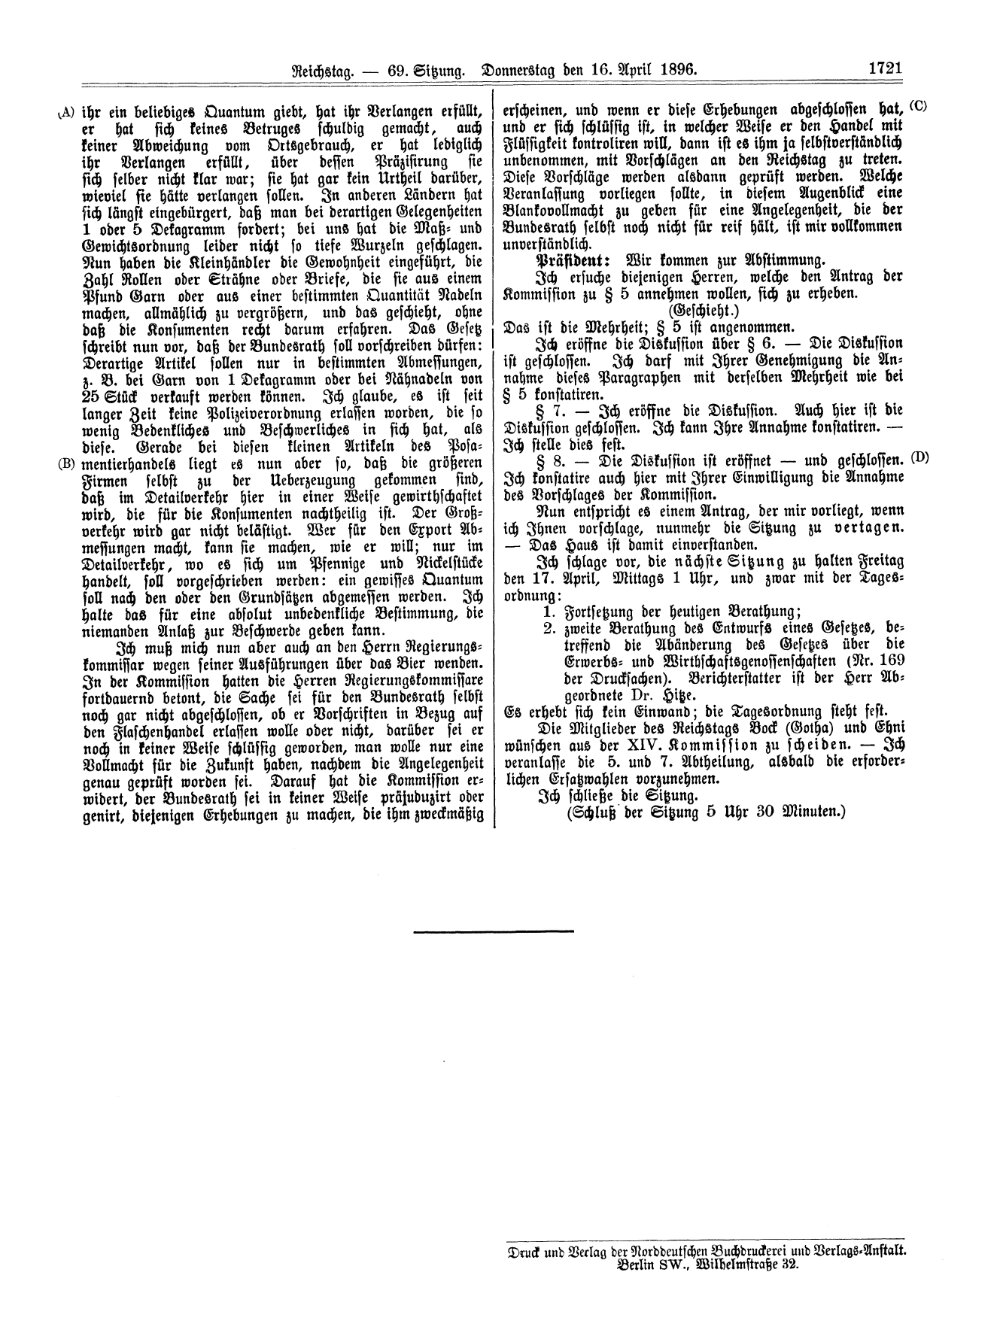 Scan of page 1721